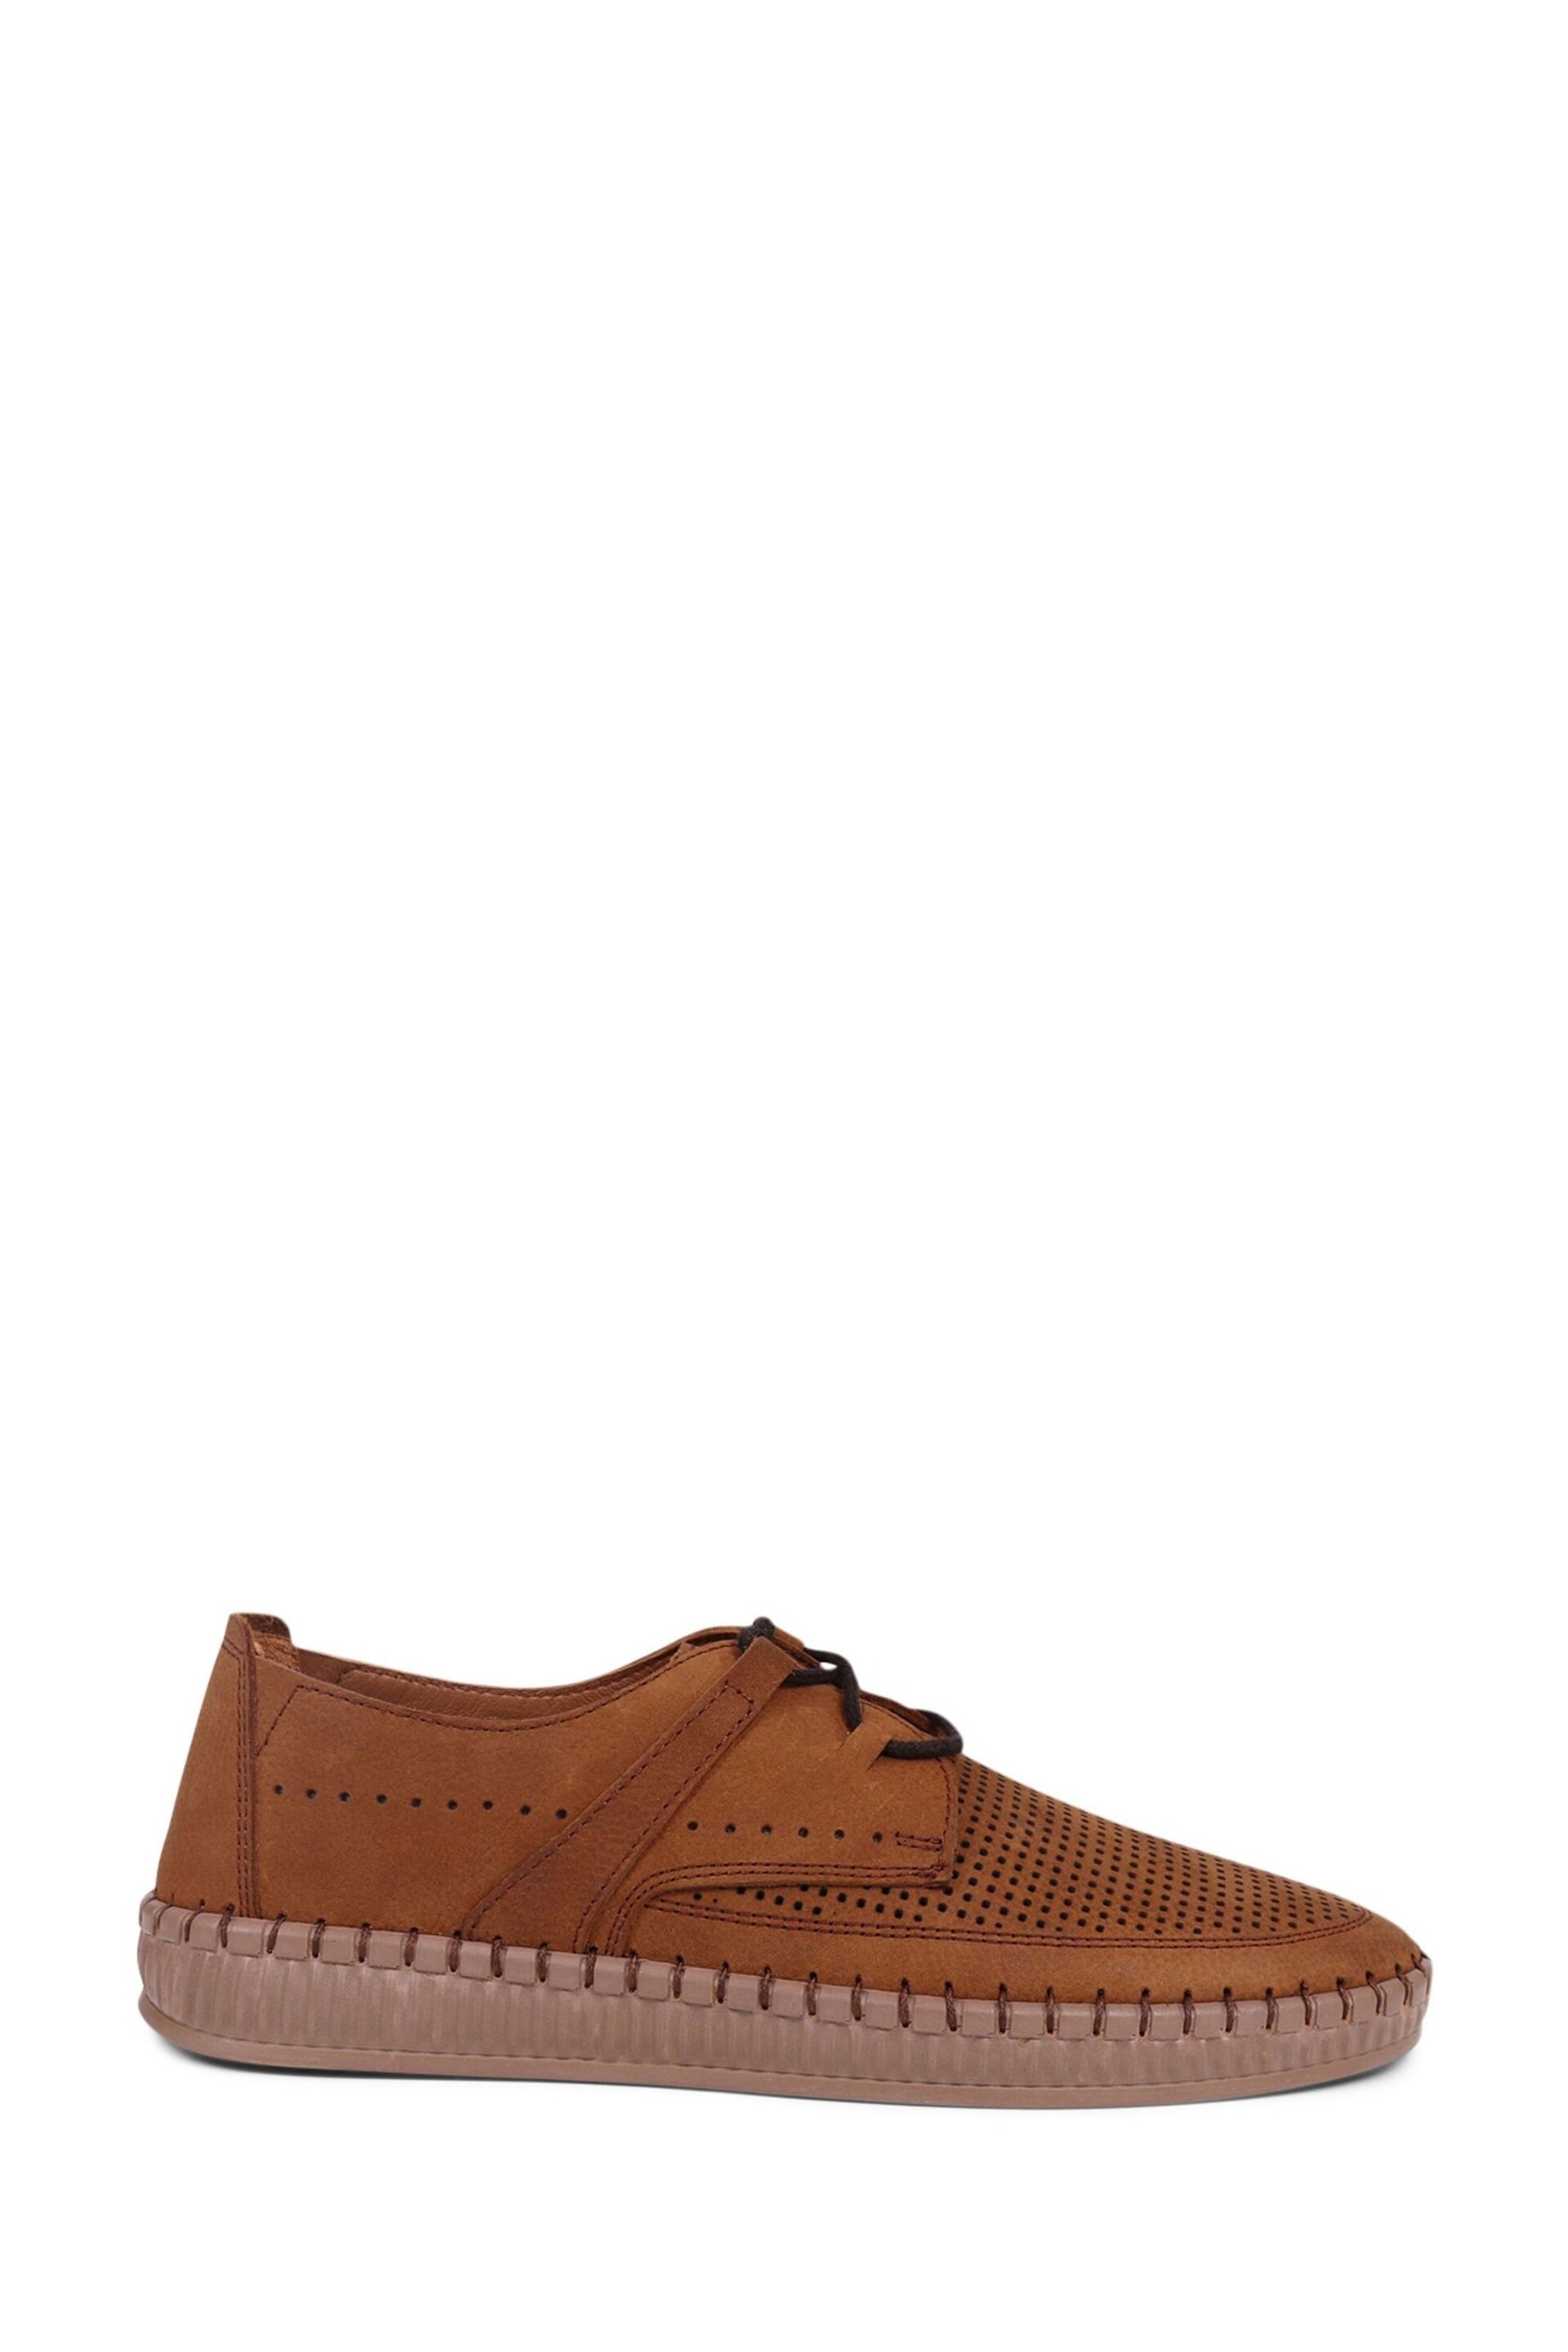 Pavers Lace-Up Leather Brown Shoes - Image 1 of 6